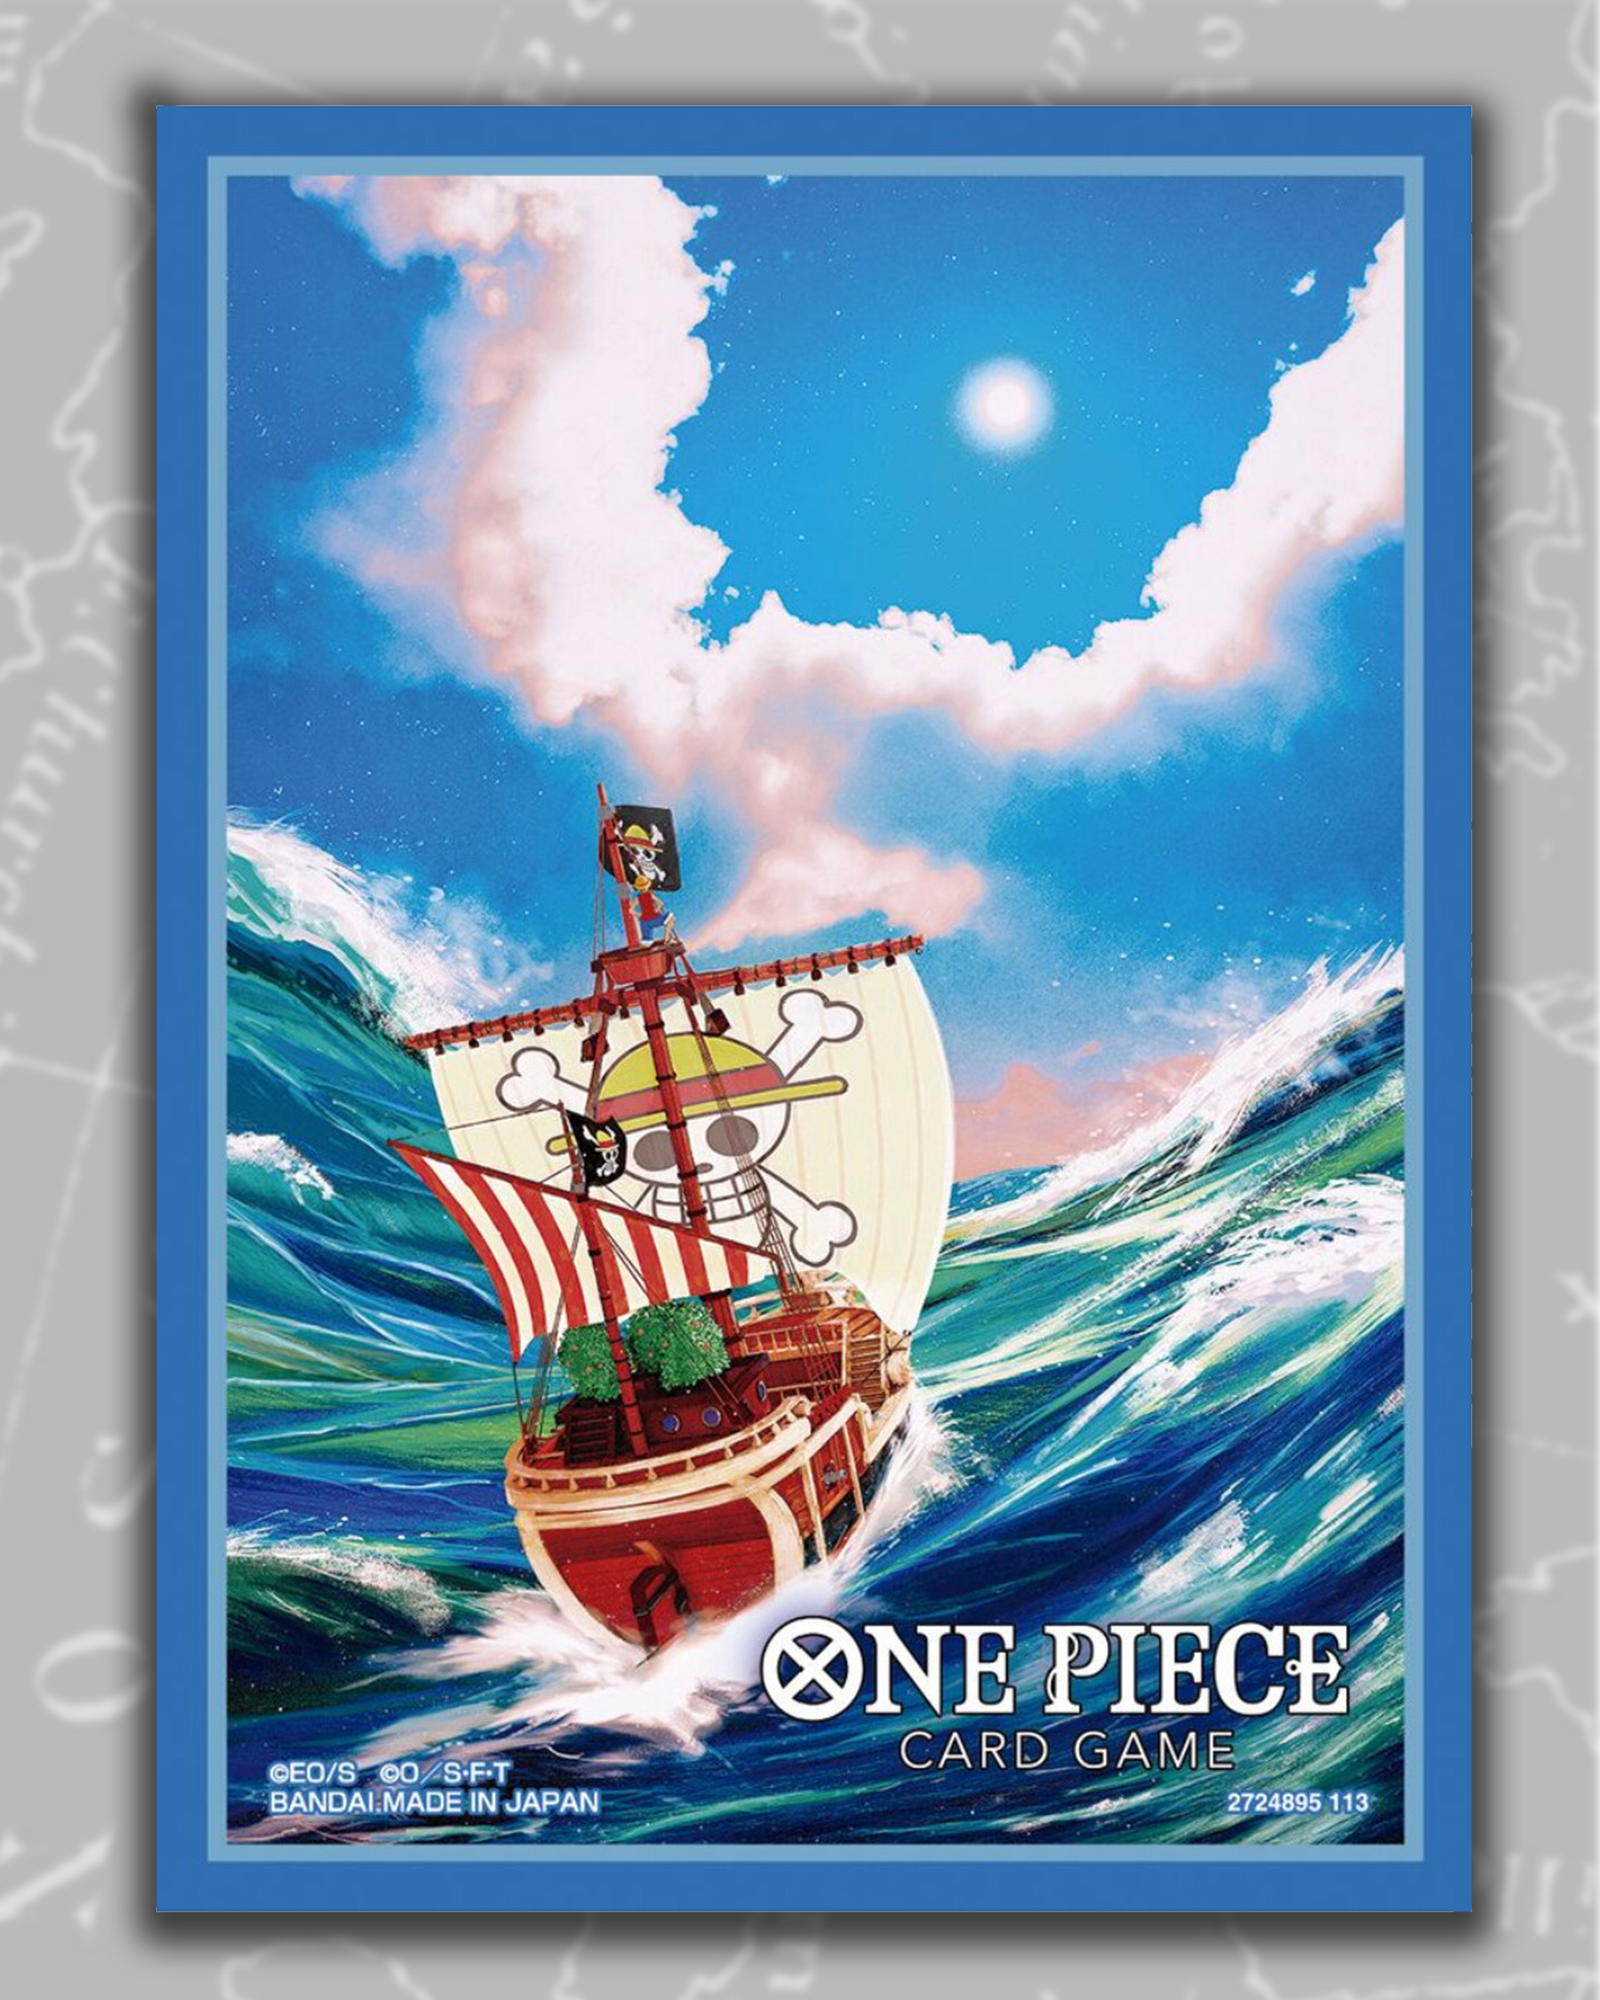 BANDAI ONE PIECE CARD GAME - OFFICIAL CARD SLEEVE LIMITED EDITION 4 Pcs SET